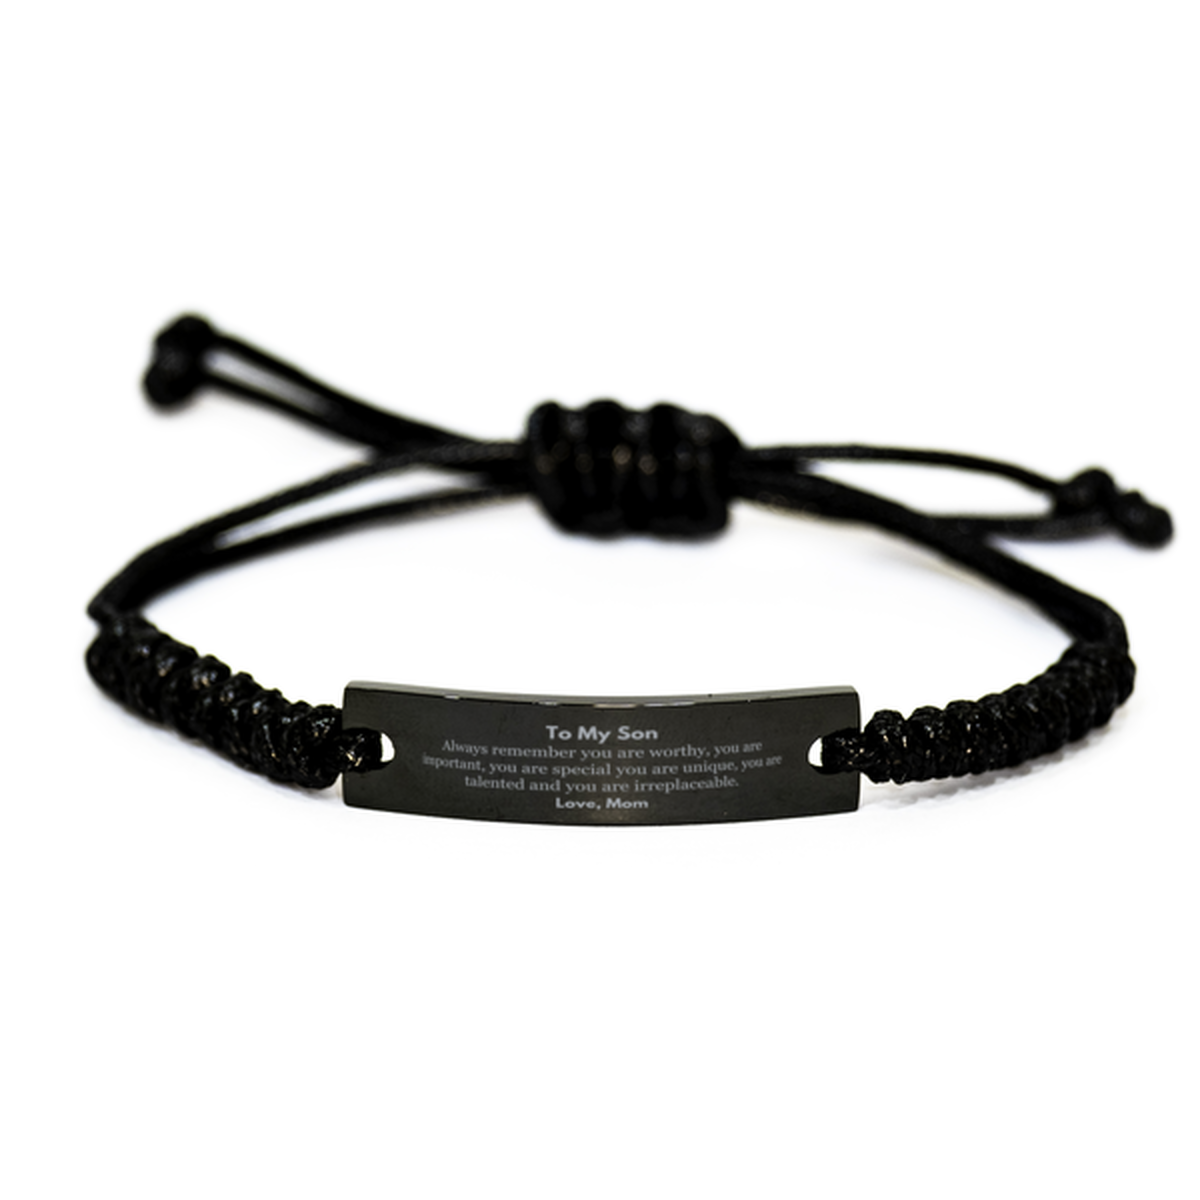 Son Birthday Gifts from Mom, Inspirational Black Rope Bracelet for Son Christmas Graduation Gifts for Son Always remember you are worthy, you are important. Love, Mom